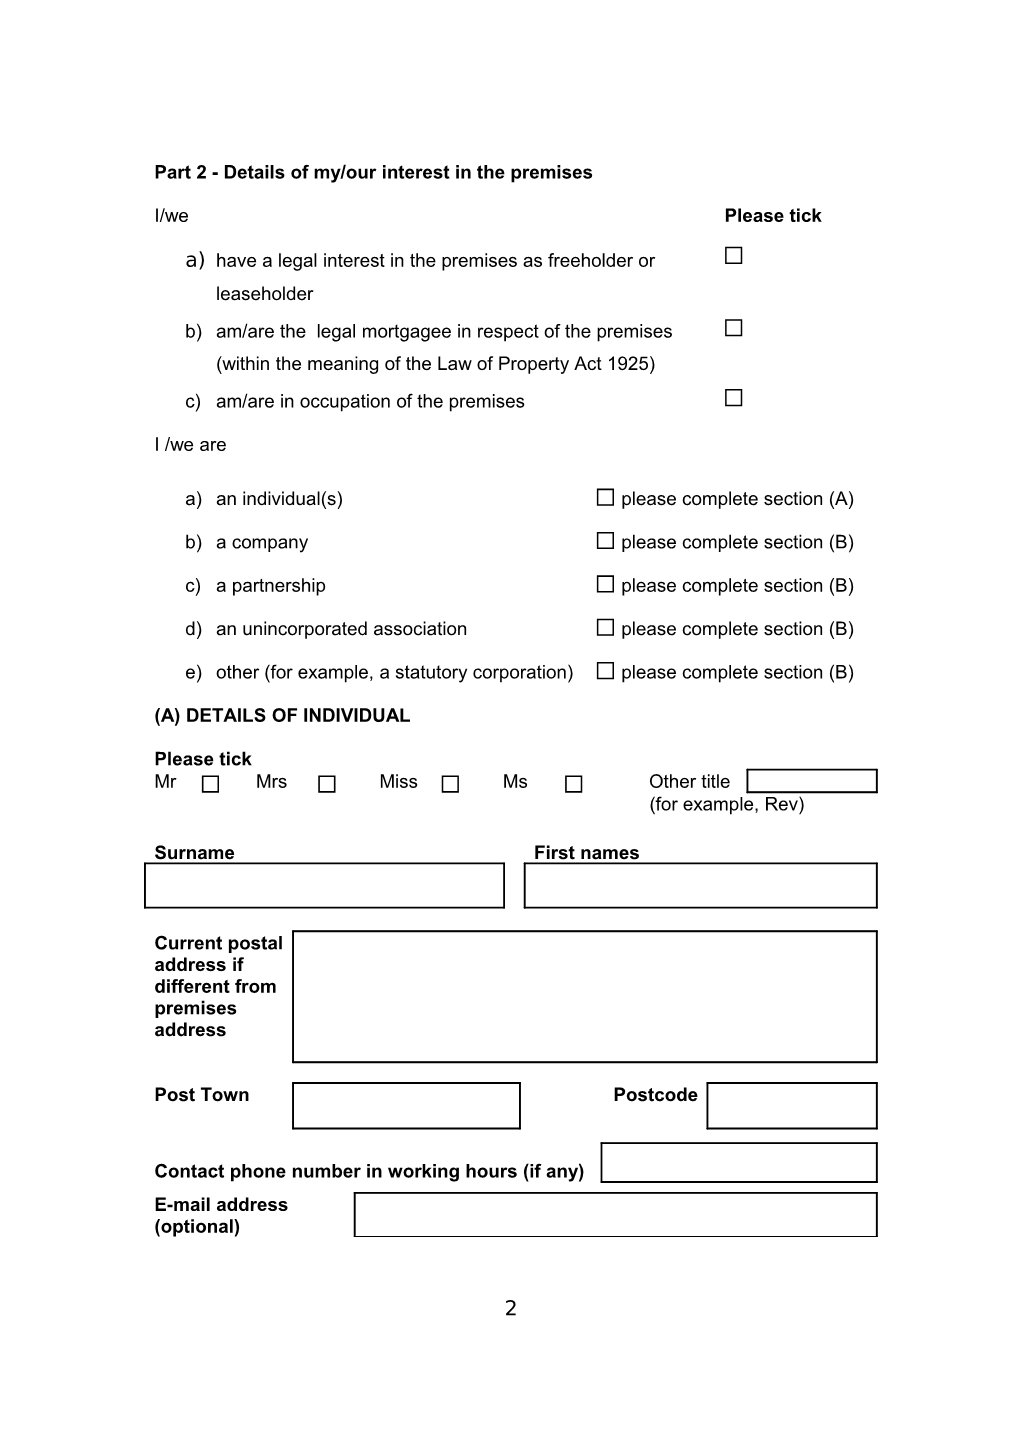 Application for a Premises Licence to Be Granted